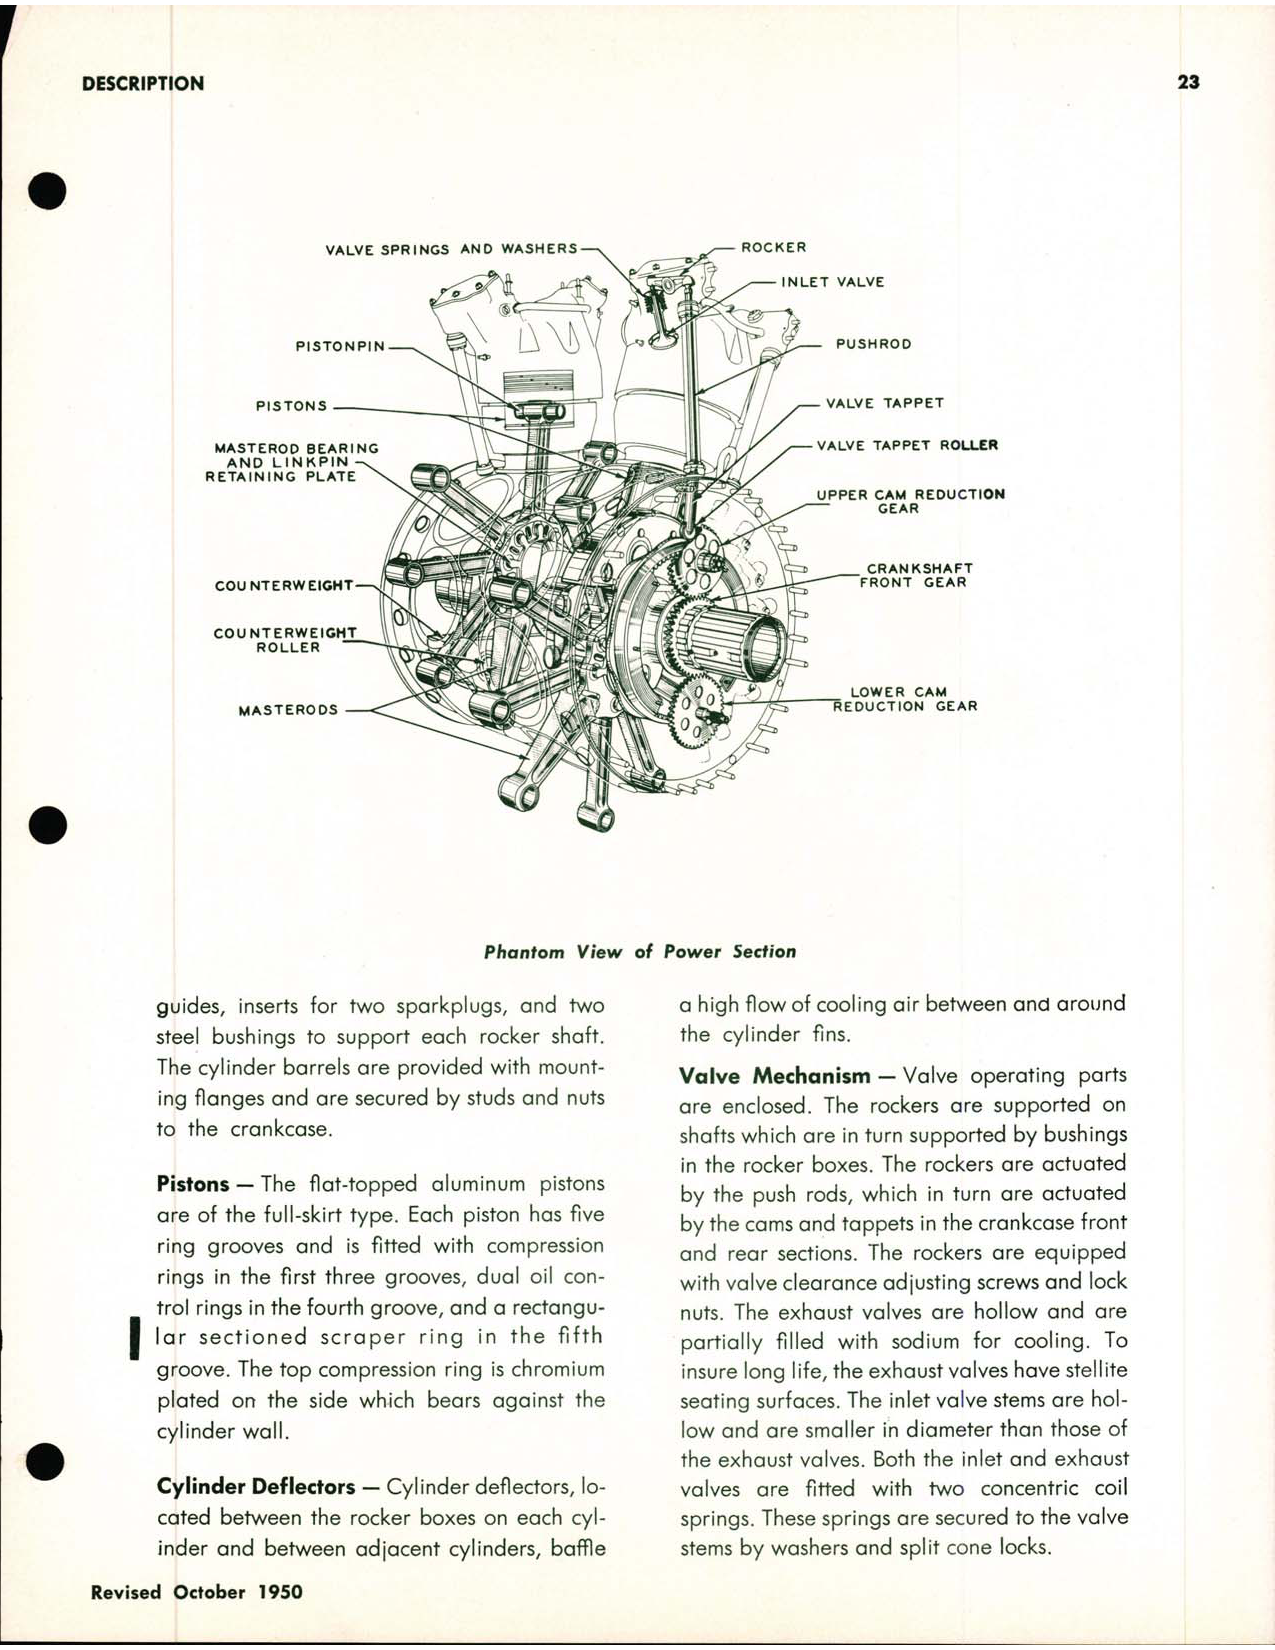 Sample page  9 from AirCorps Library document: Double Wasp R-2800 CA Engine Maintenance Manual - Pratt & Whitney Aircraft